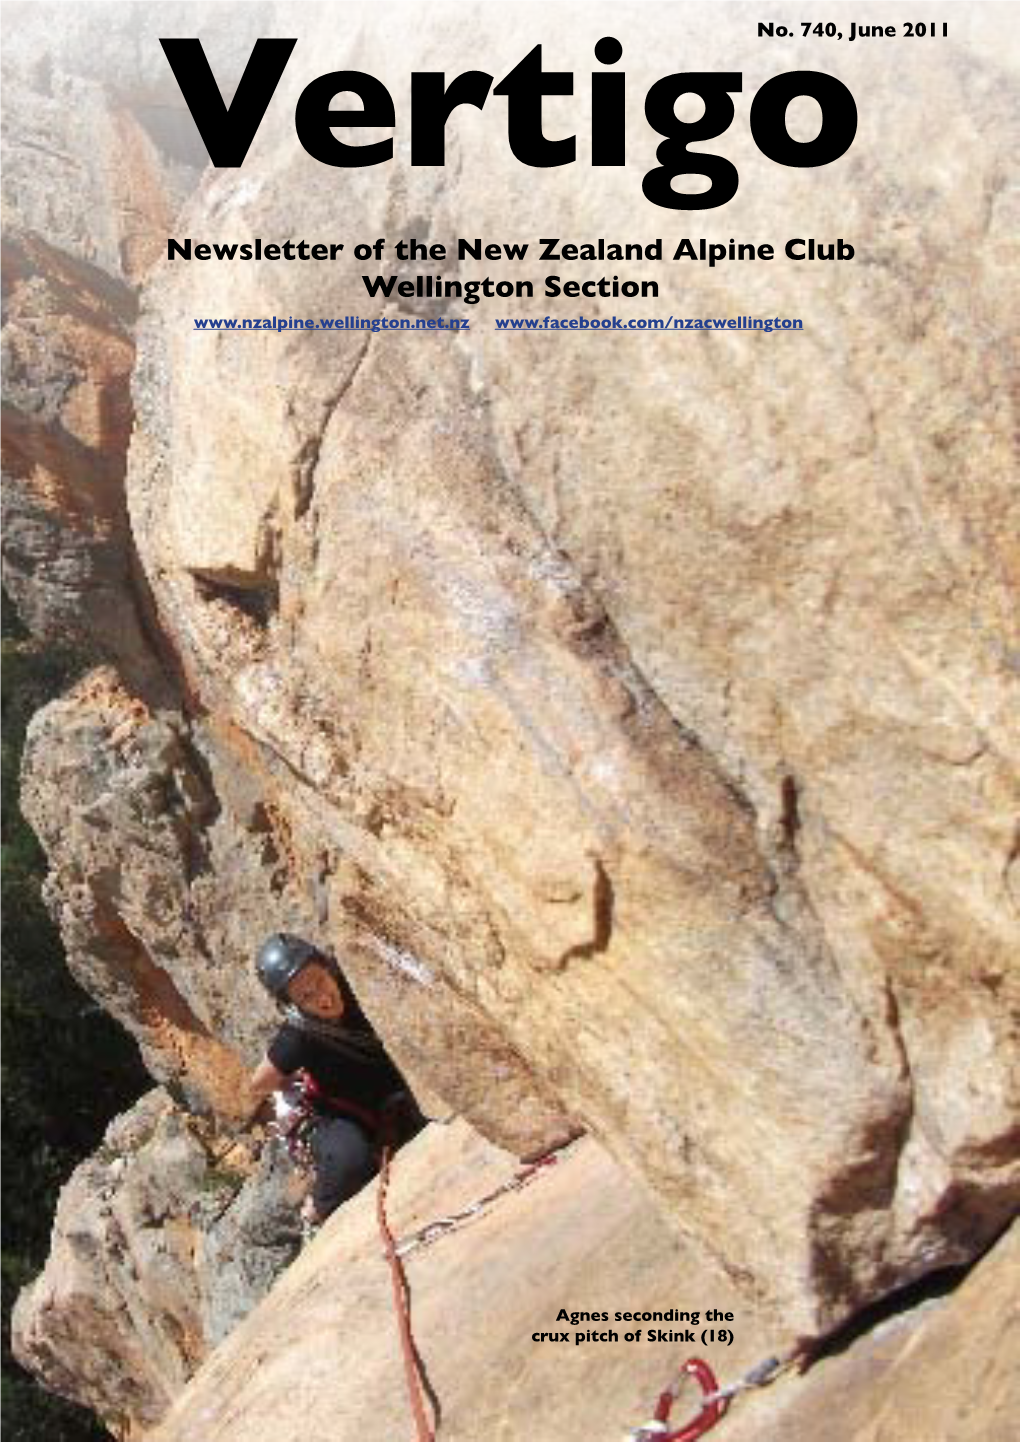 Newsletter of the New Zealand Alpine Club Wellington Section